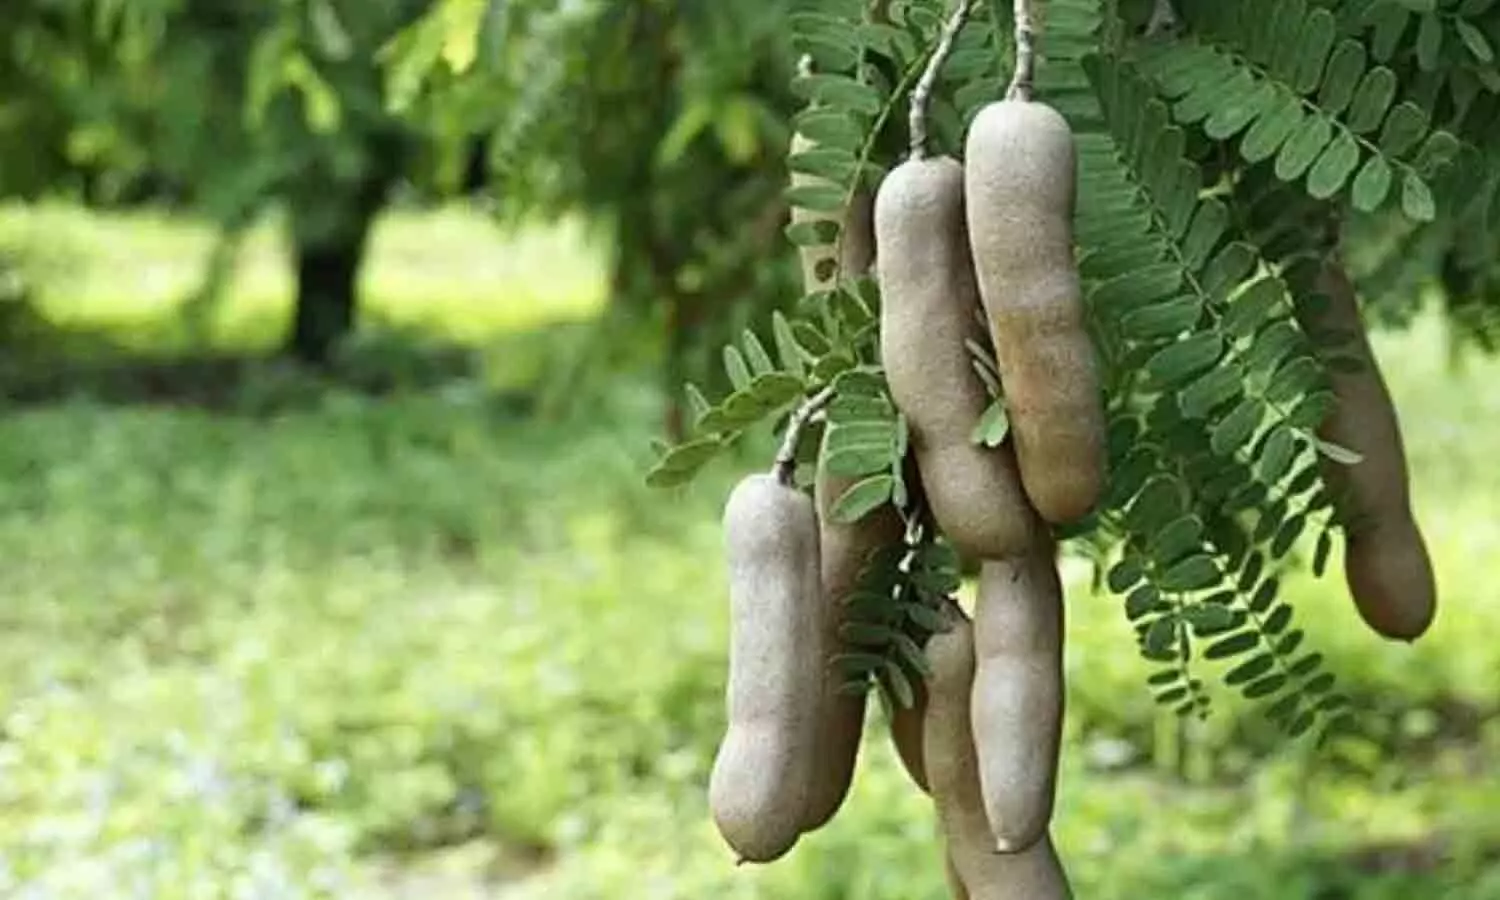 Imli Ke Fayde: Tamarind improves the quality of sperm, removes the problem of infertility in men